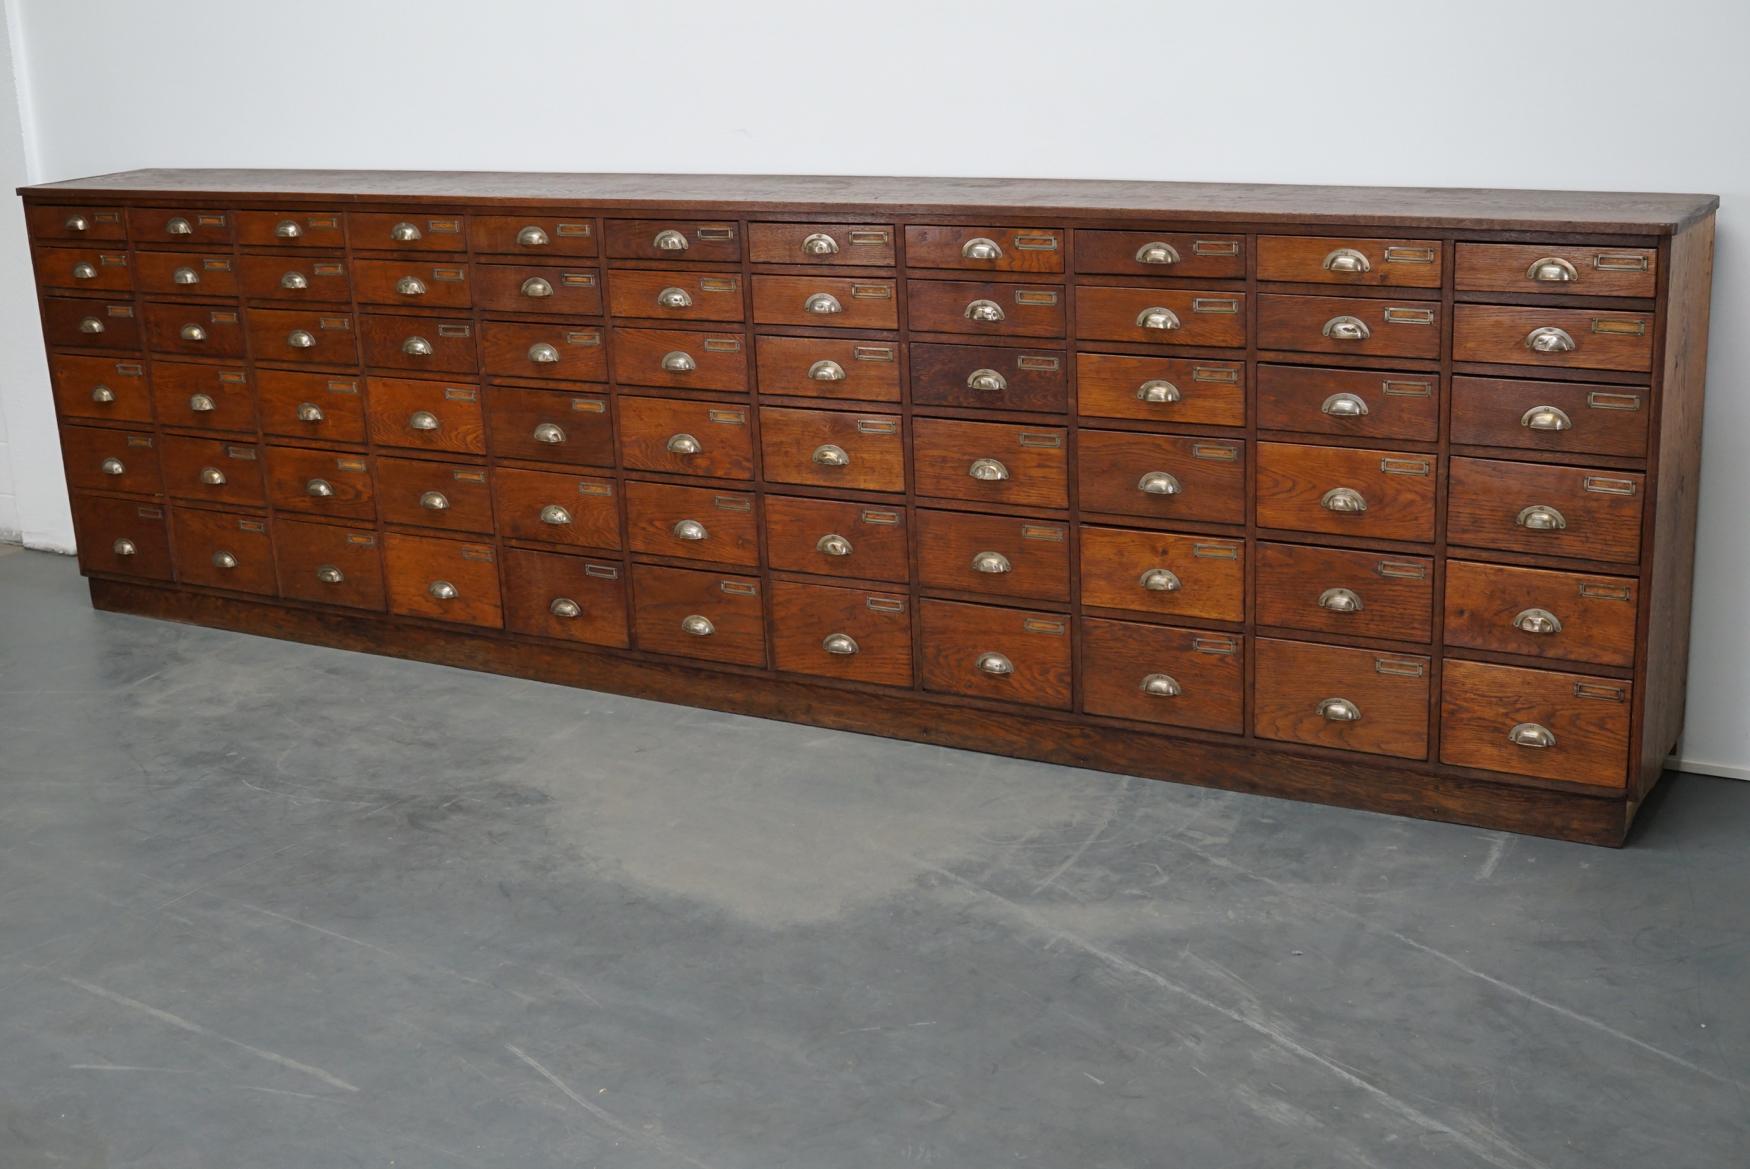 This apothecary cabinet was produced during the 1930s in the Netherlands. This piece features 66 drawers in different sizes. The interior dimensions of the drawers are: D x W x H 35 x 29 x 6 / 8 / 10 / 14 / 17 cm. The cabinet was used to store